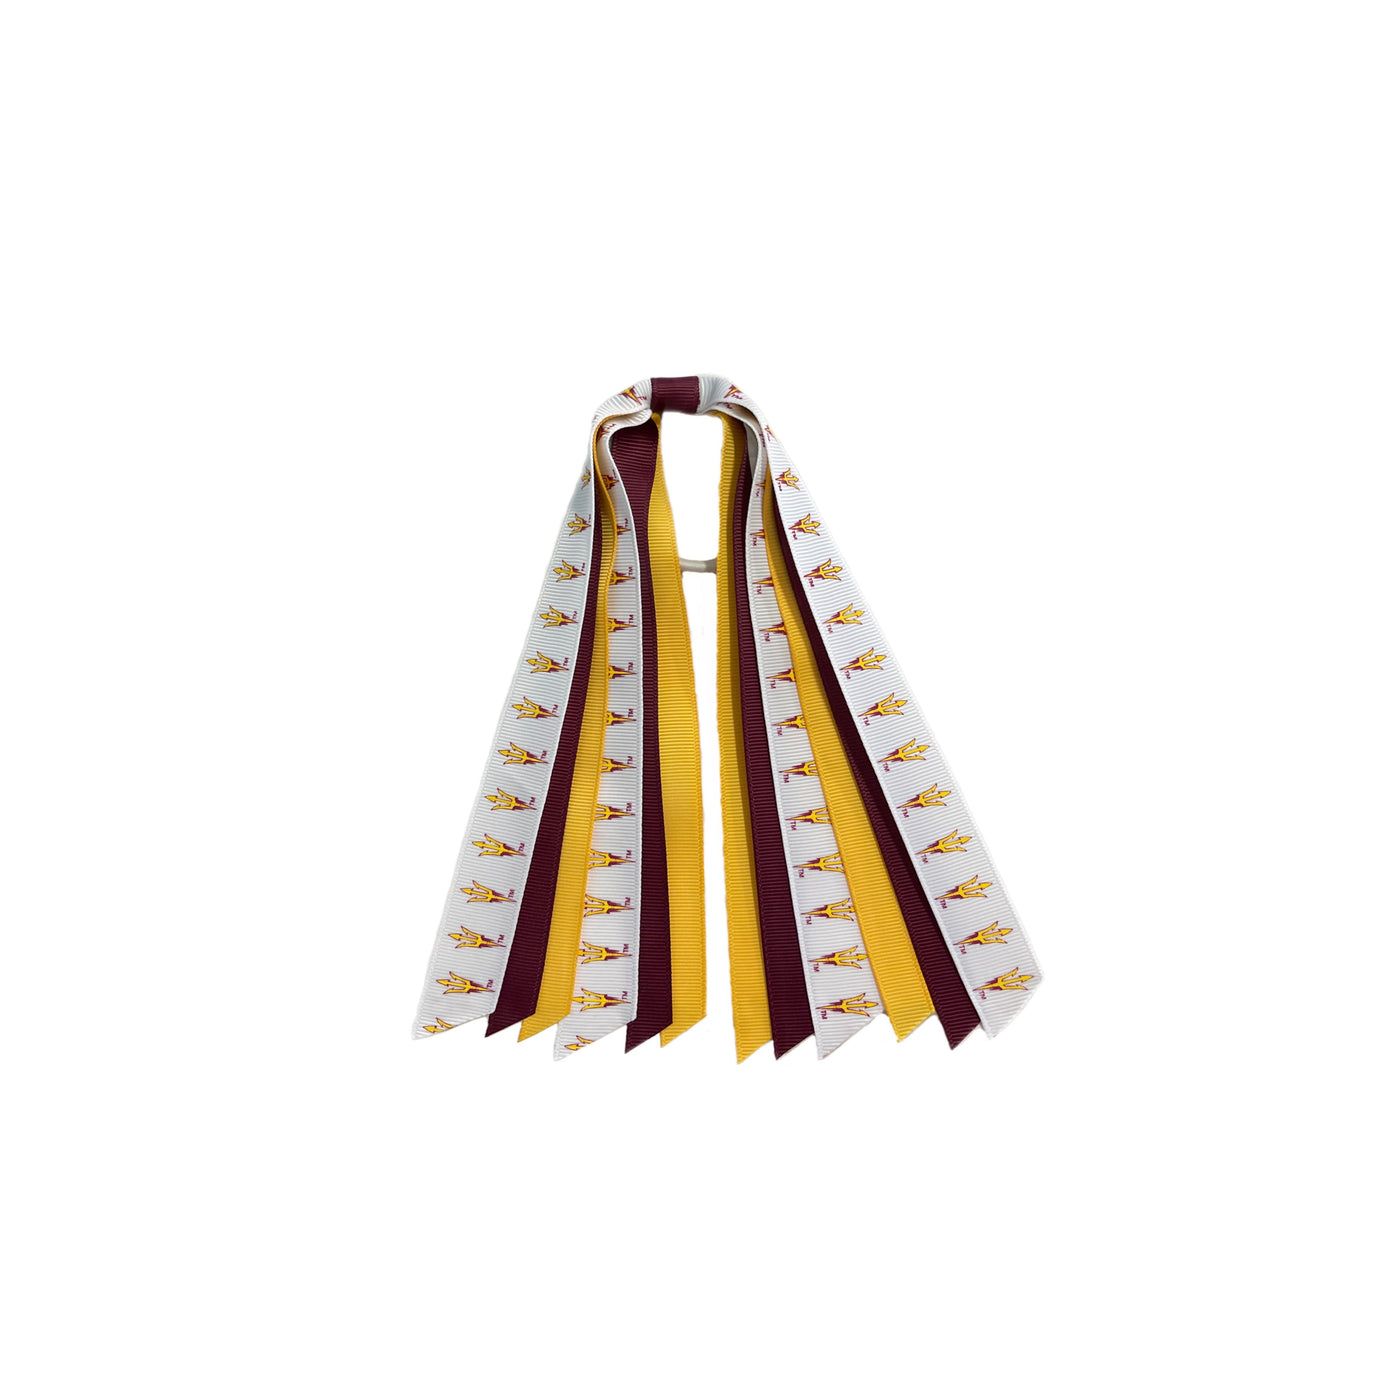 ASU hair tie with gold, maroon, and white with pitchfork ribbons attached.